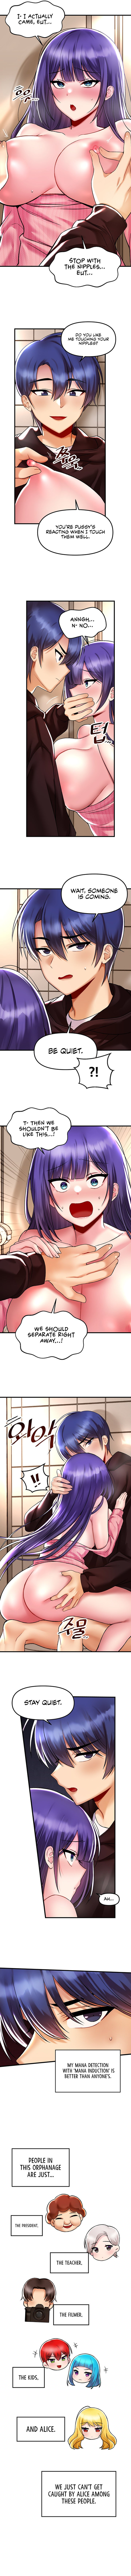 trapped-in-the-academys-eroge-chap-38-5